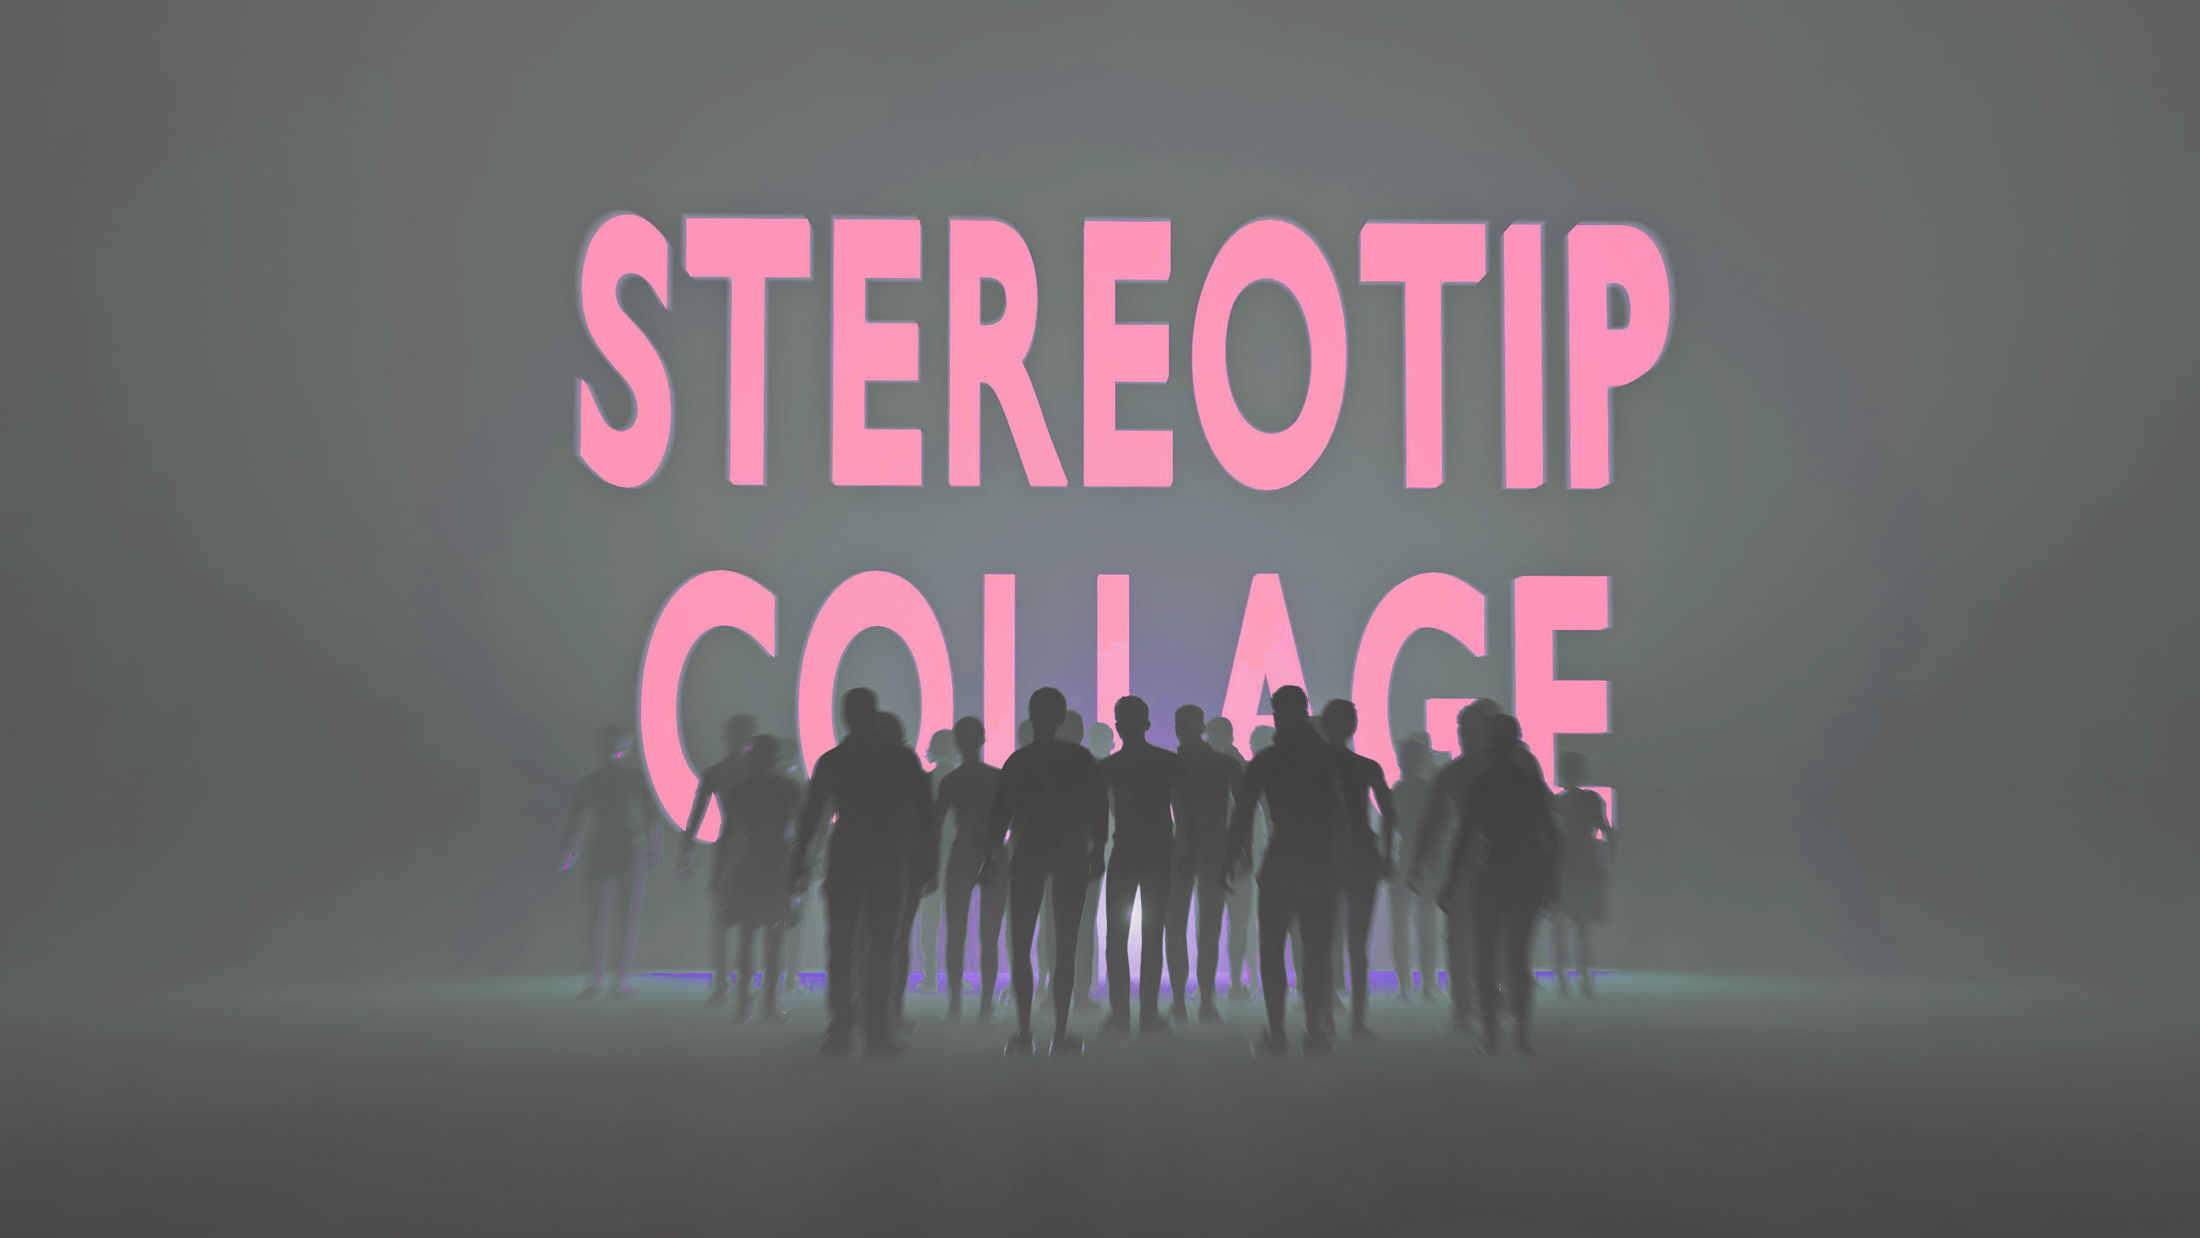 Stereotip Collage